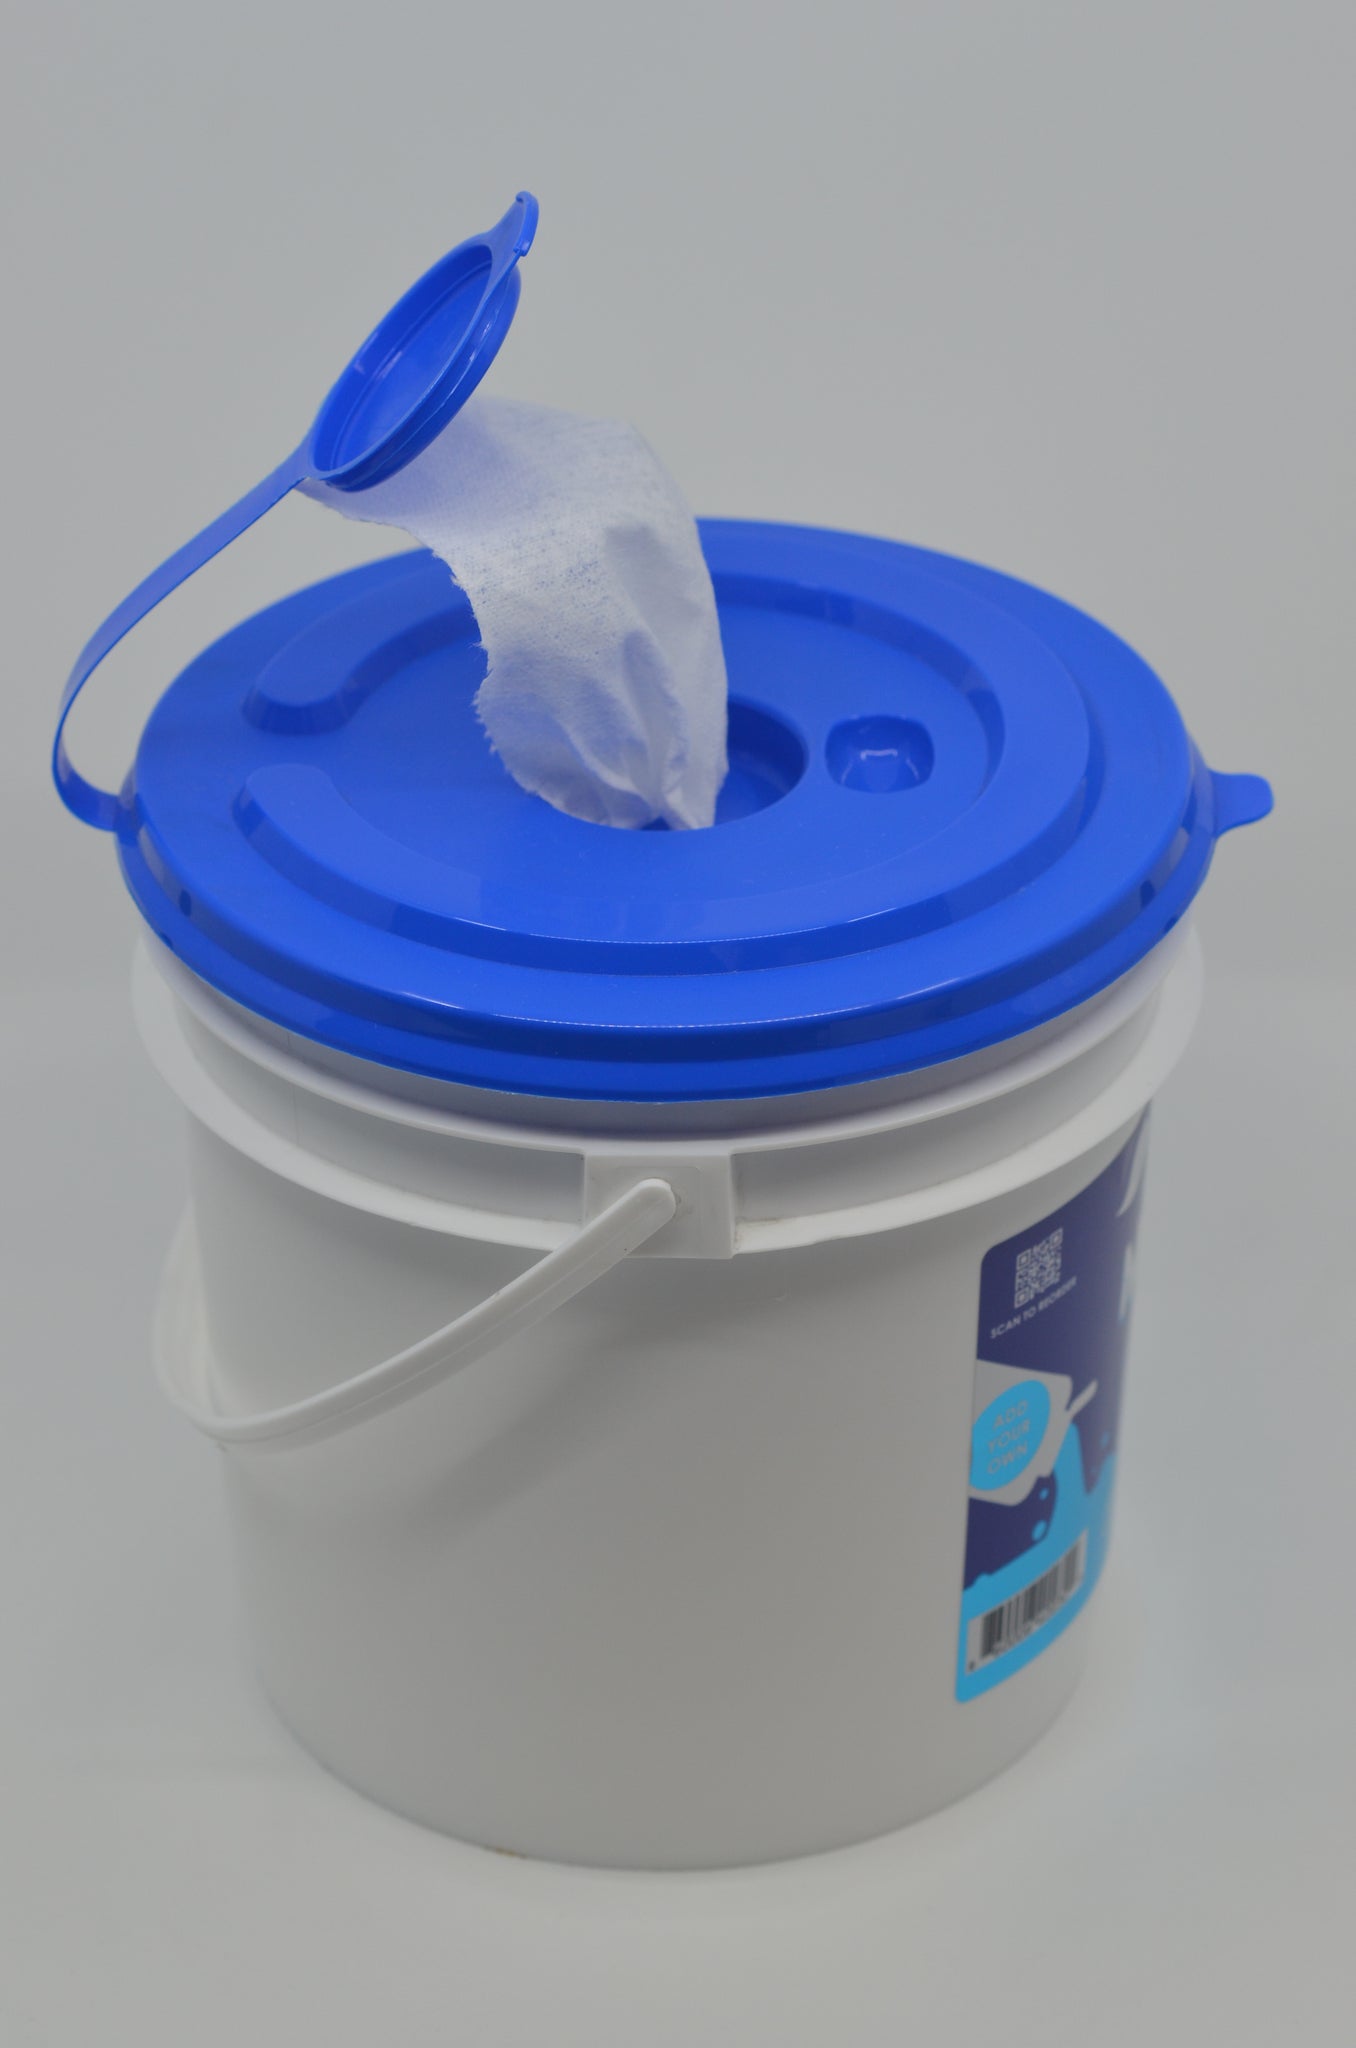 Dry Bucket Wipes - Make Your Own Wet Wipes with Dispenser Buckets for –  Fresh Towel